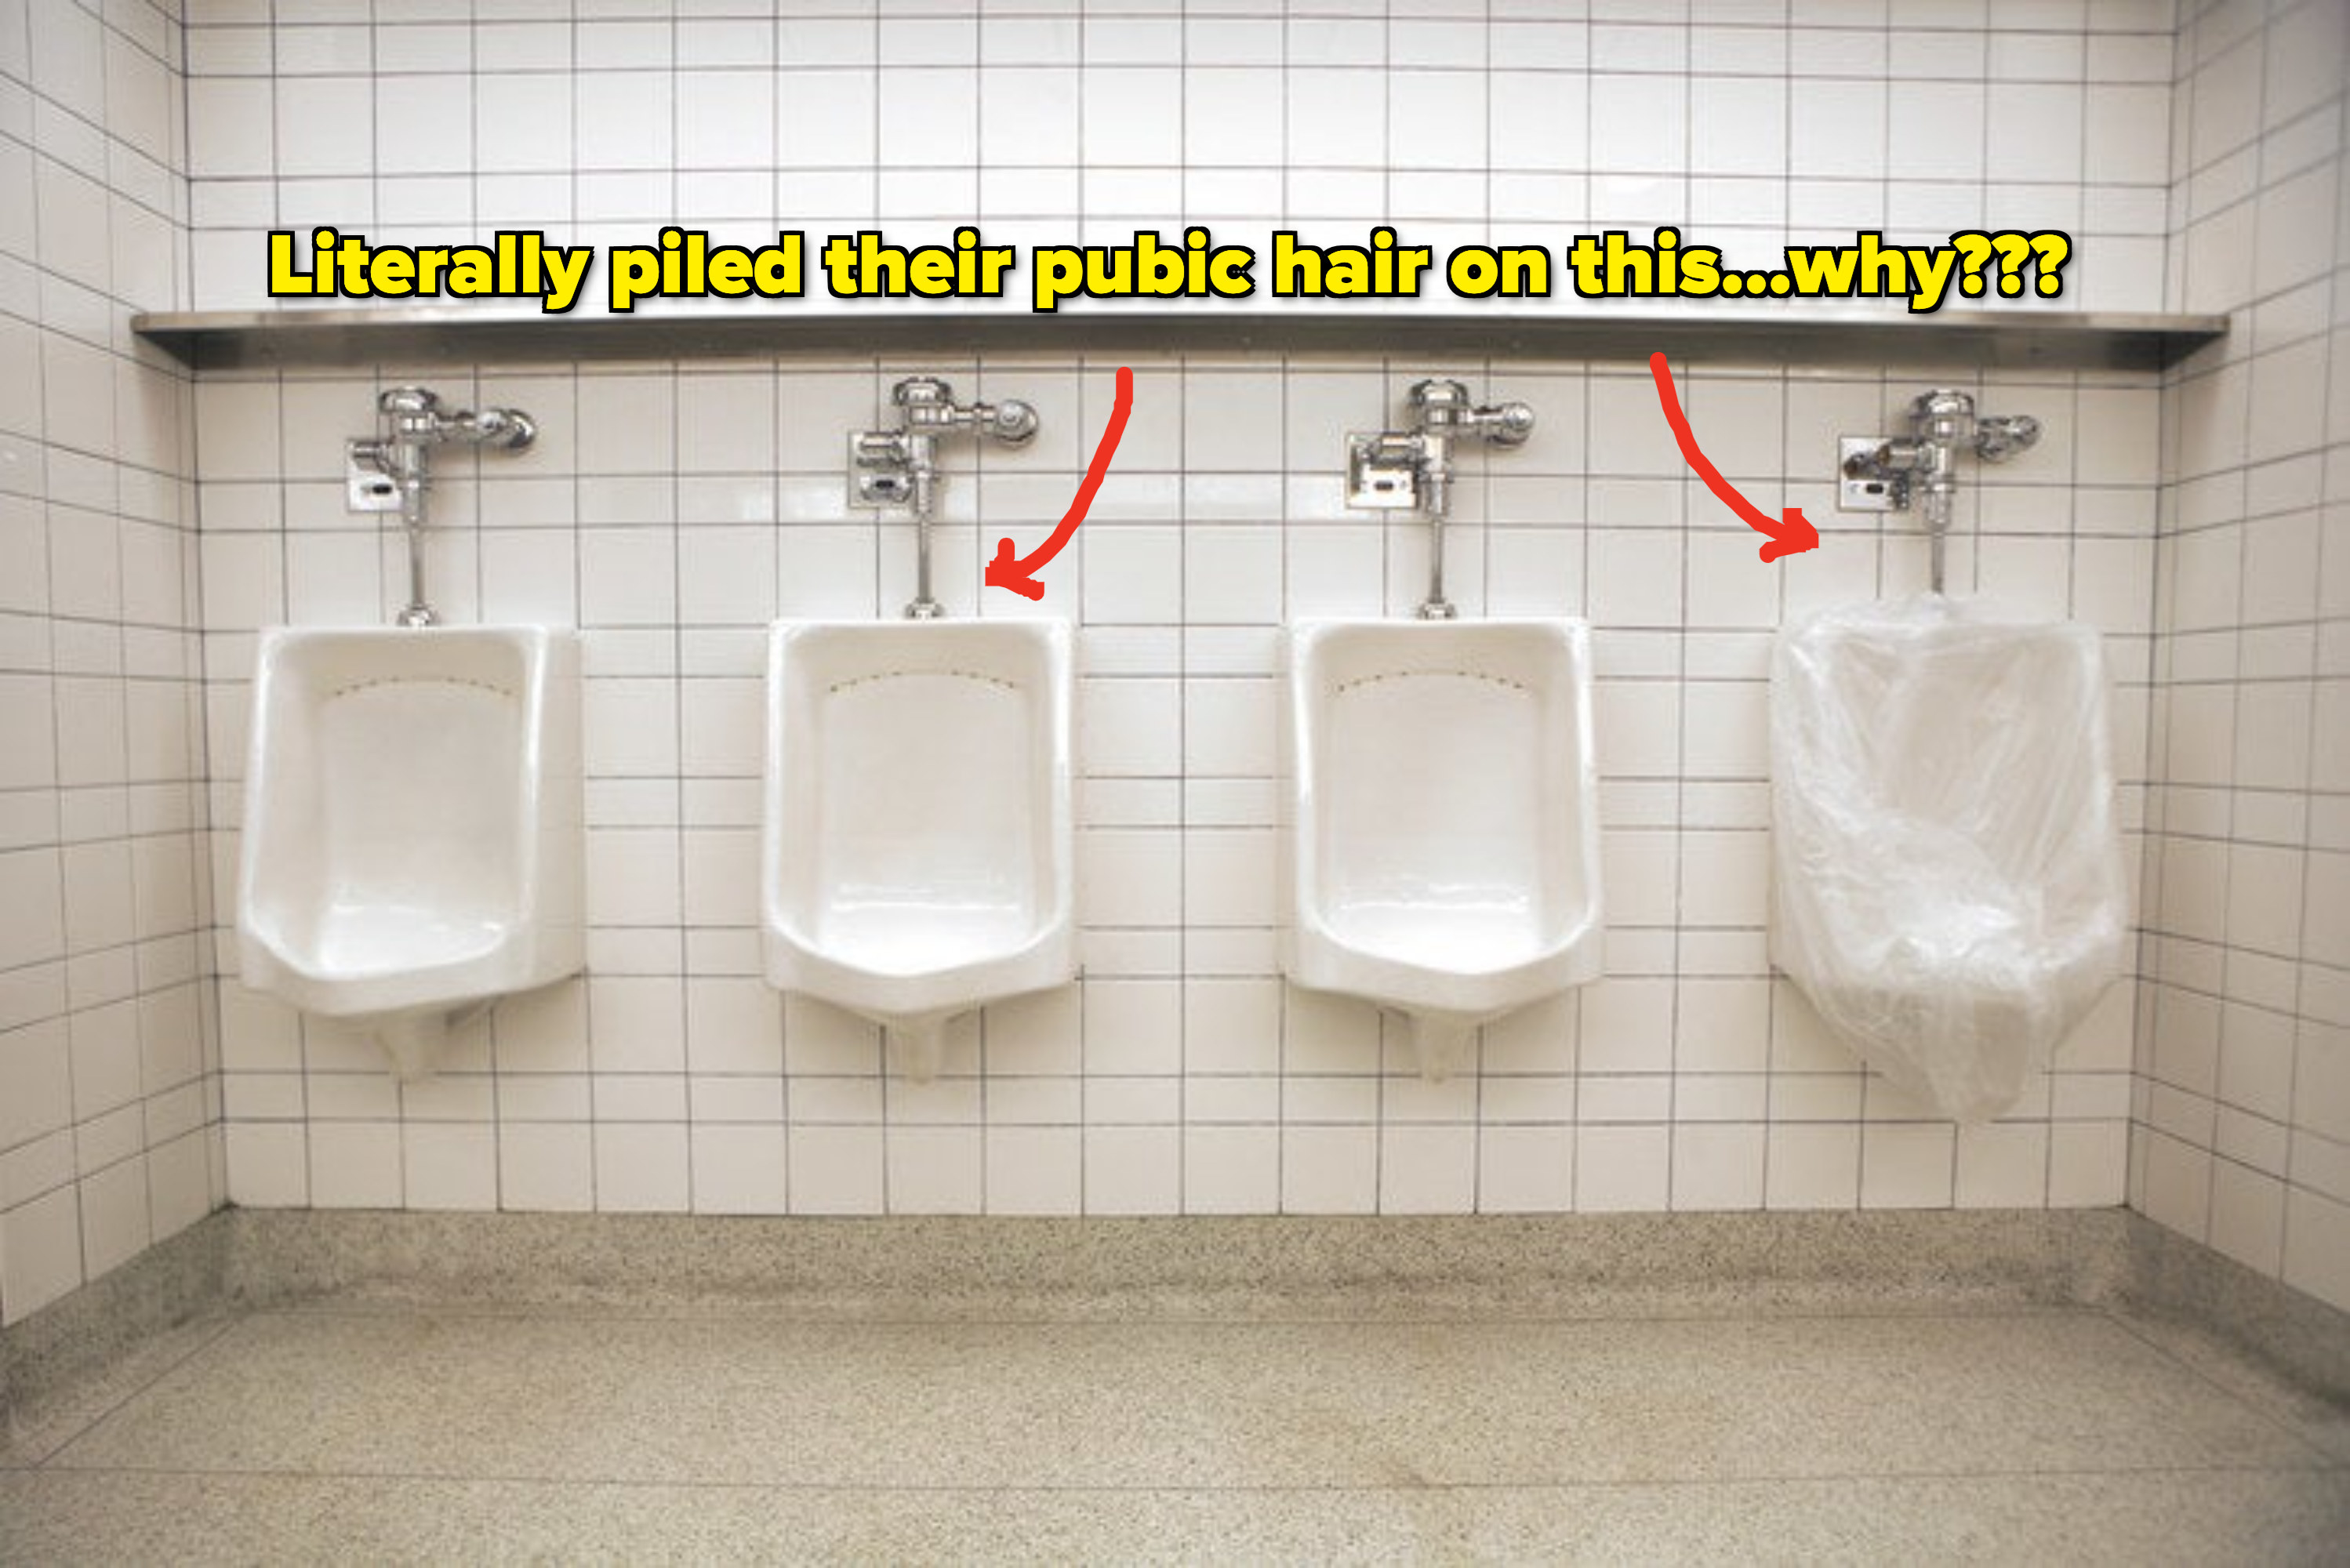 A row of urinals with text that says, &quot;Literally piled their public hair on this...why???&quot;